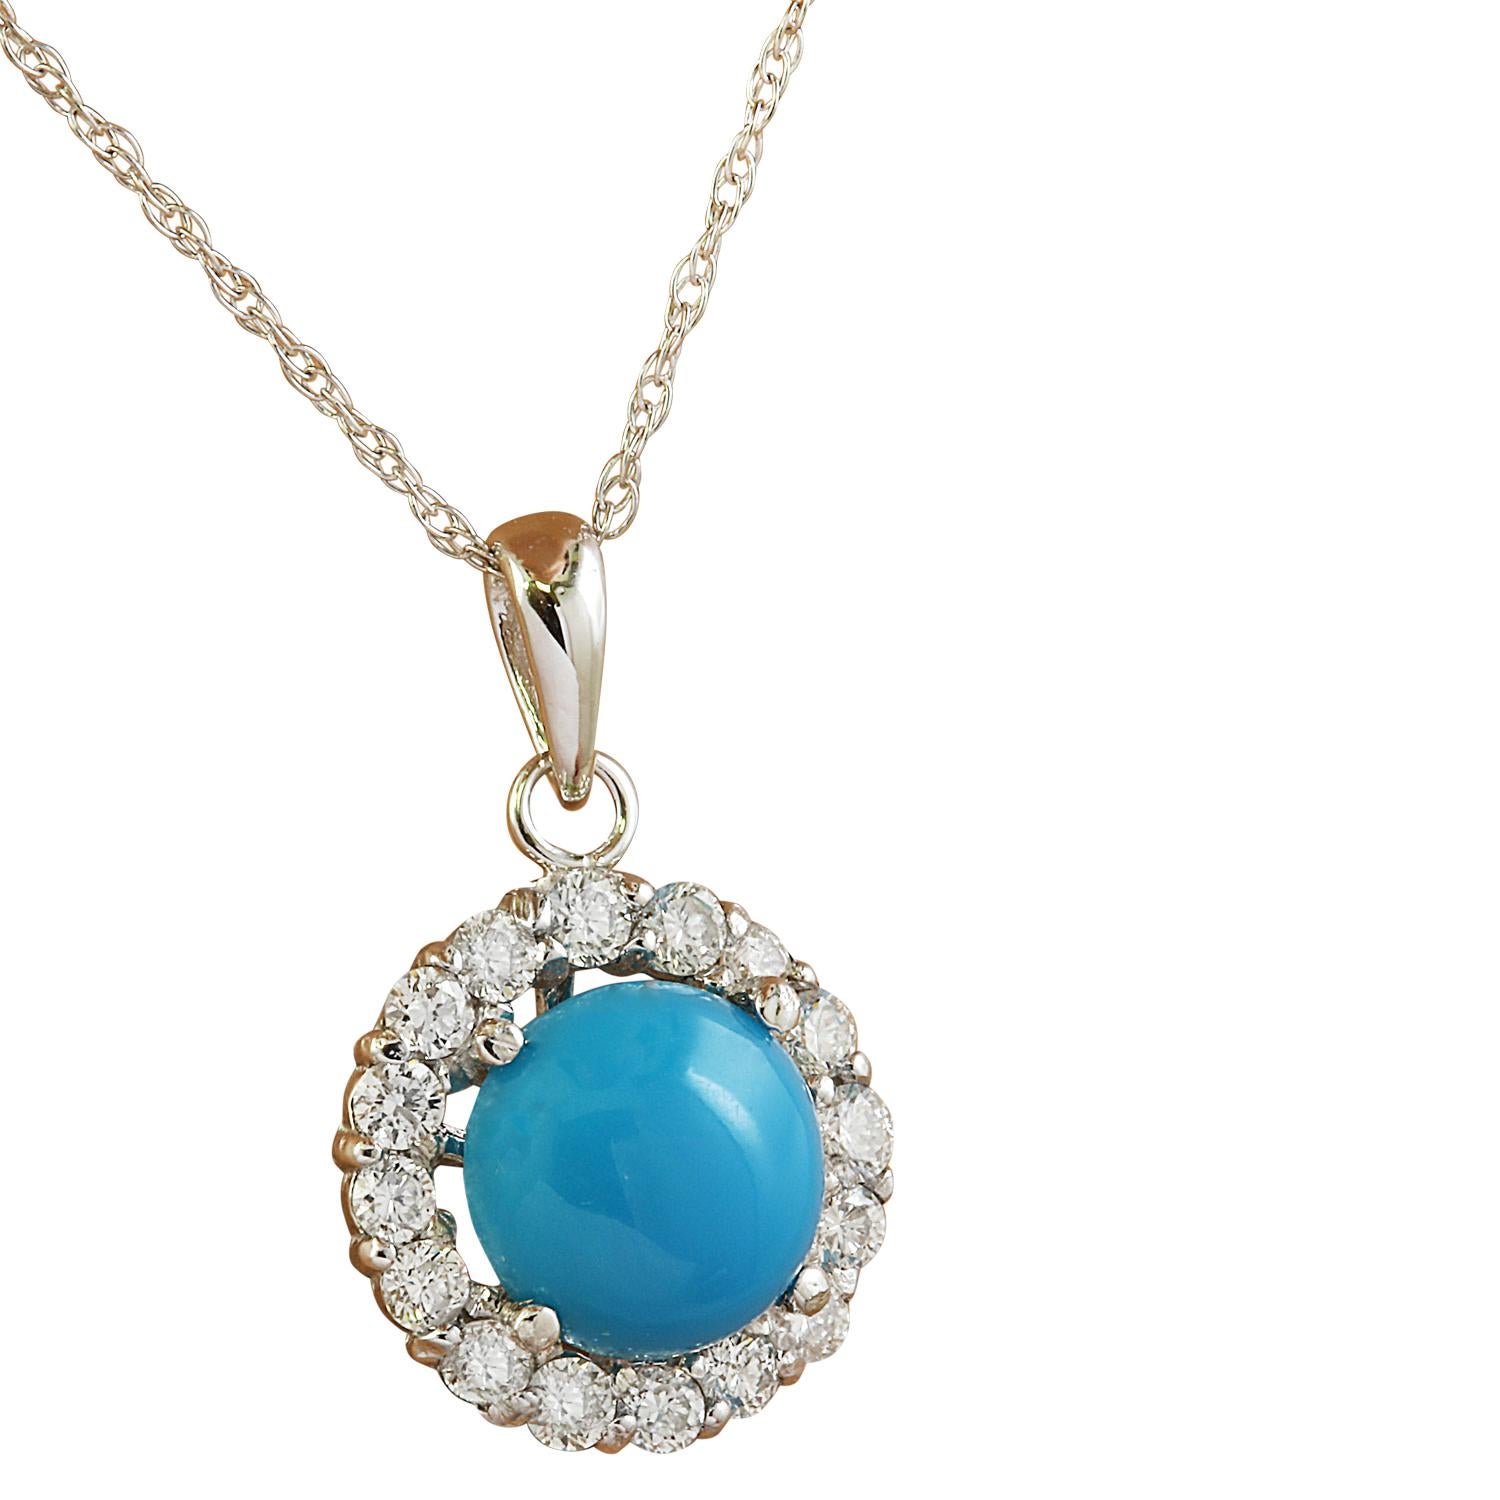 Introducing our exquisite 14 Karat Solid White Gold Diamond Necklace featuring a stunning 1.82 Carat Natural Turquoise centerpiece, stamped for authenticity. This necklace, with a total weight of 0.90 grams and a length of 16 inches, exudes elegance